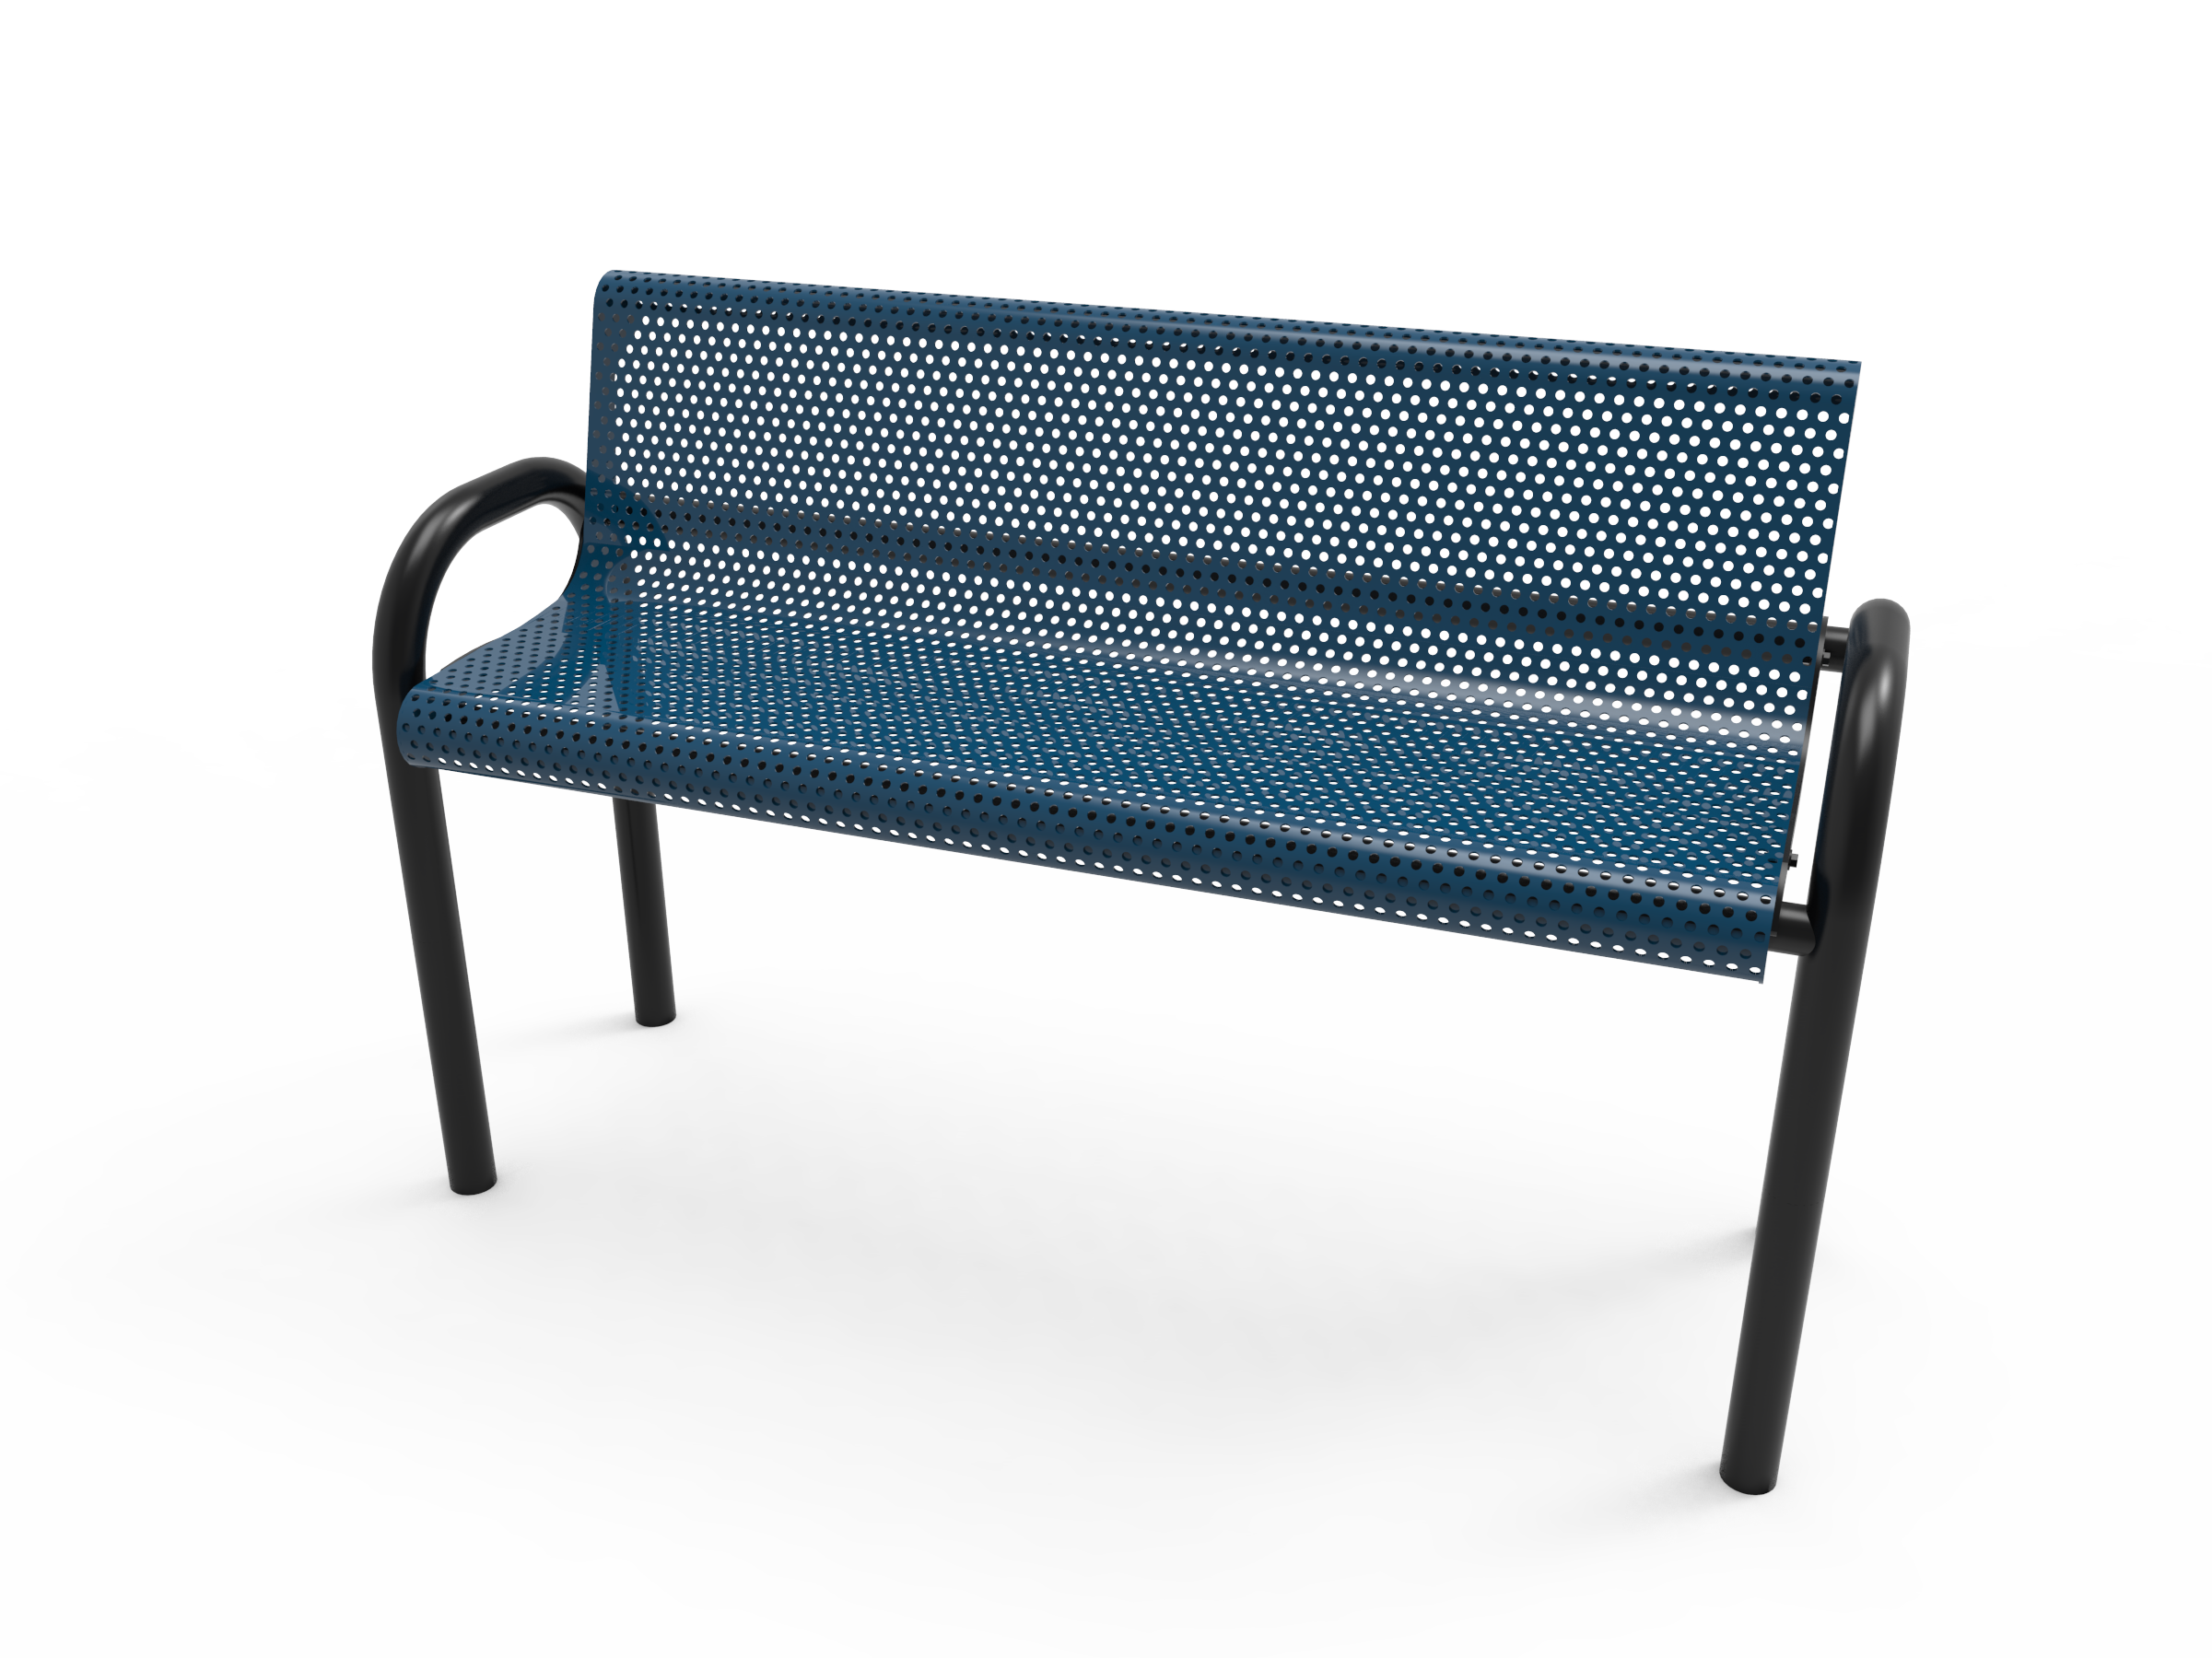 Rivendale MOD Bench with Back